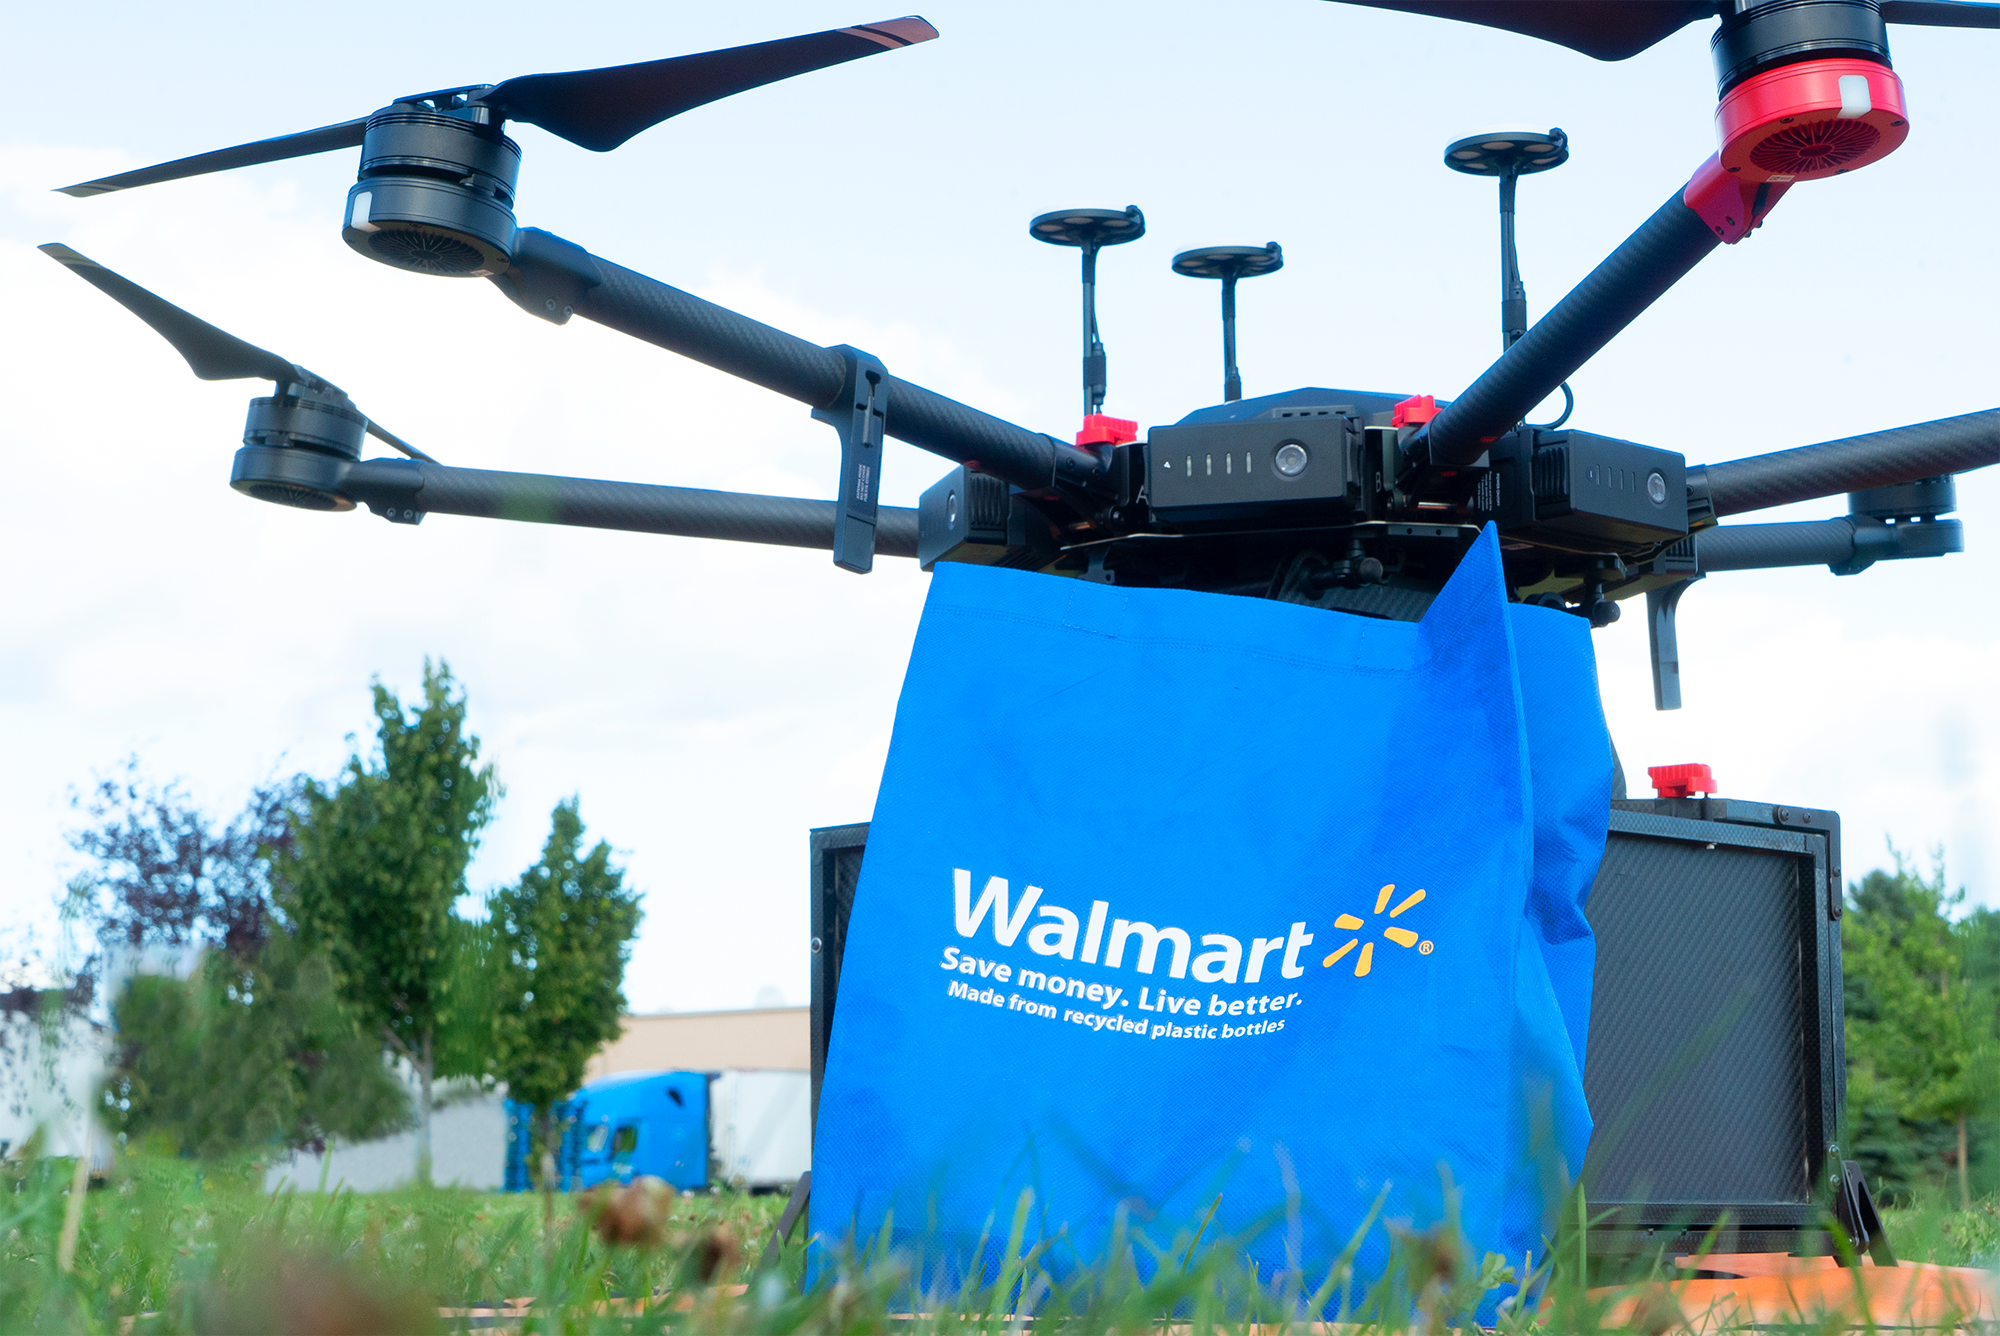 Ground-level shot of a Walmart bag being dropped off by a delivery drone